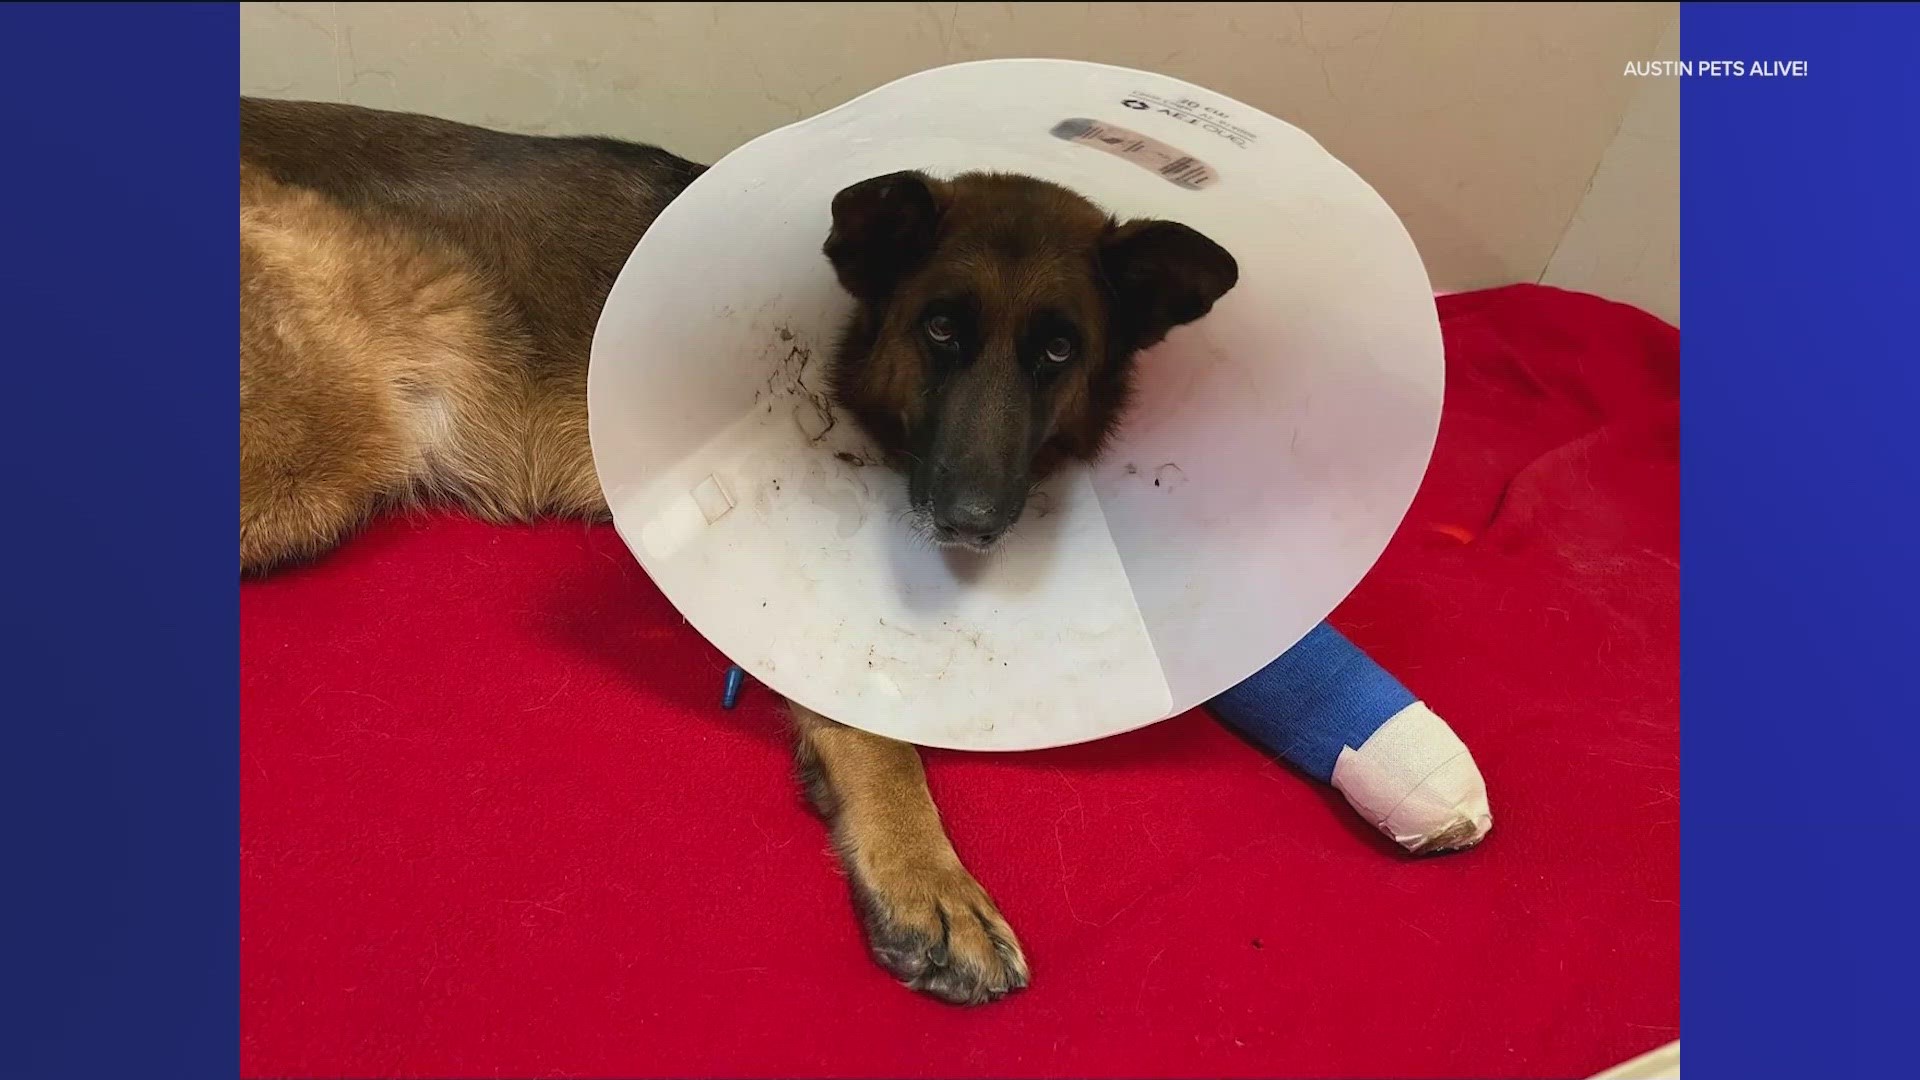 The two dogs were put into the nonprofit's care after receiving gunshot wounds. No charges will be filed, but they still need the community's support.